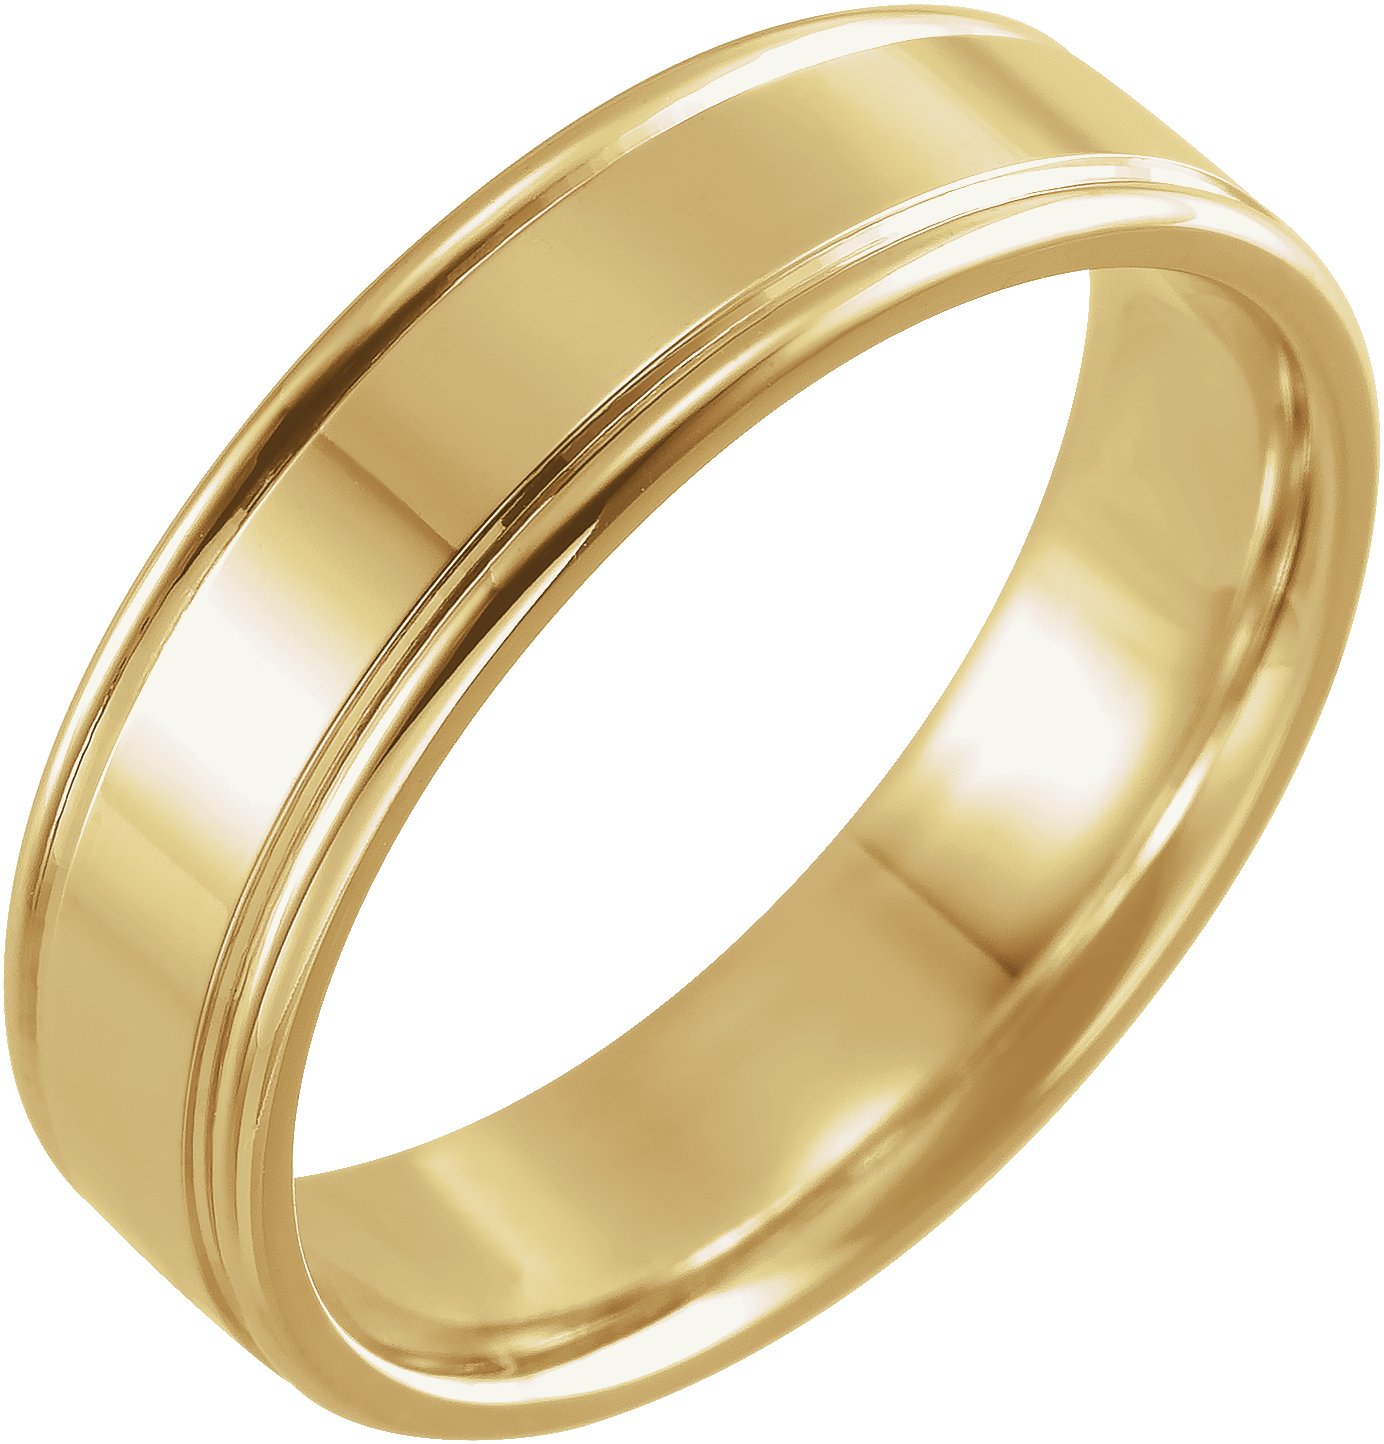 14K Yellow 6 mm Grooved Band Size 9.5